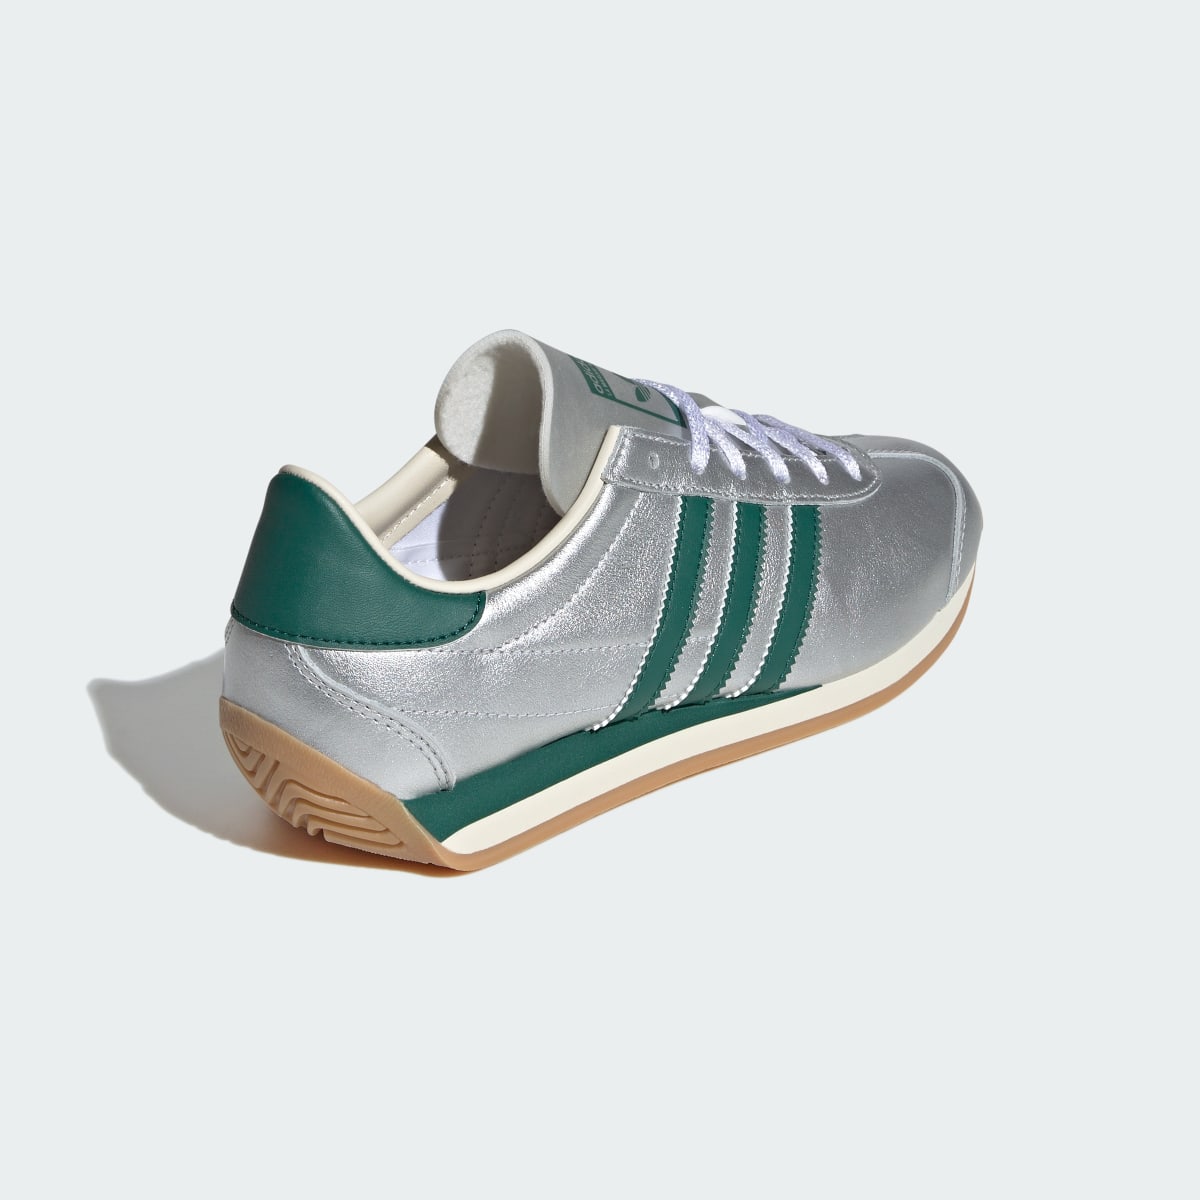 Adidas Chaussure Country OG. 6